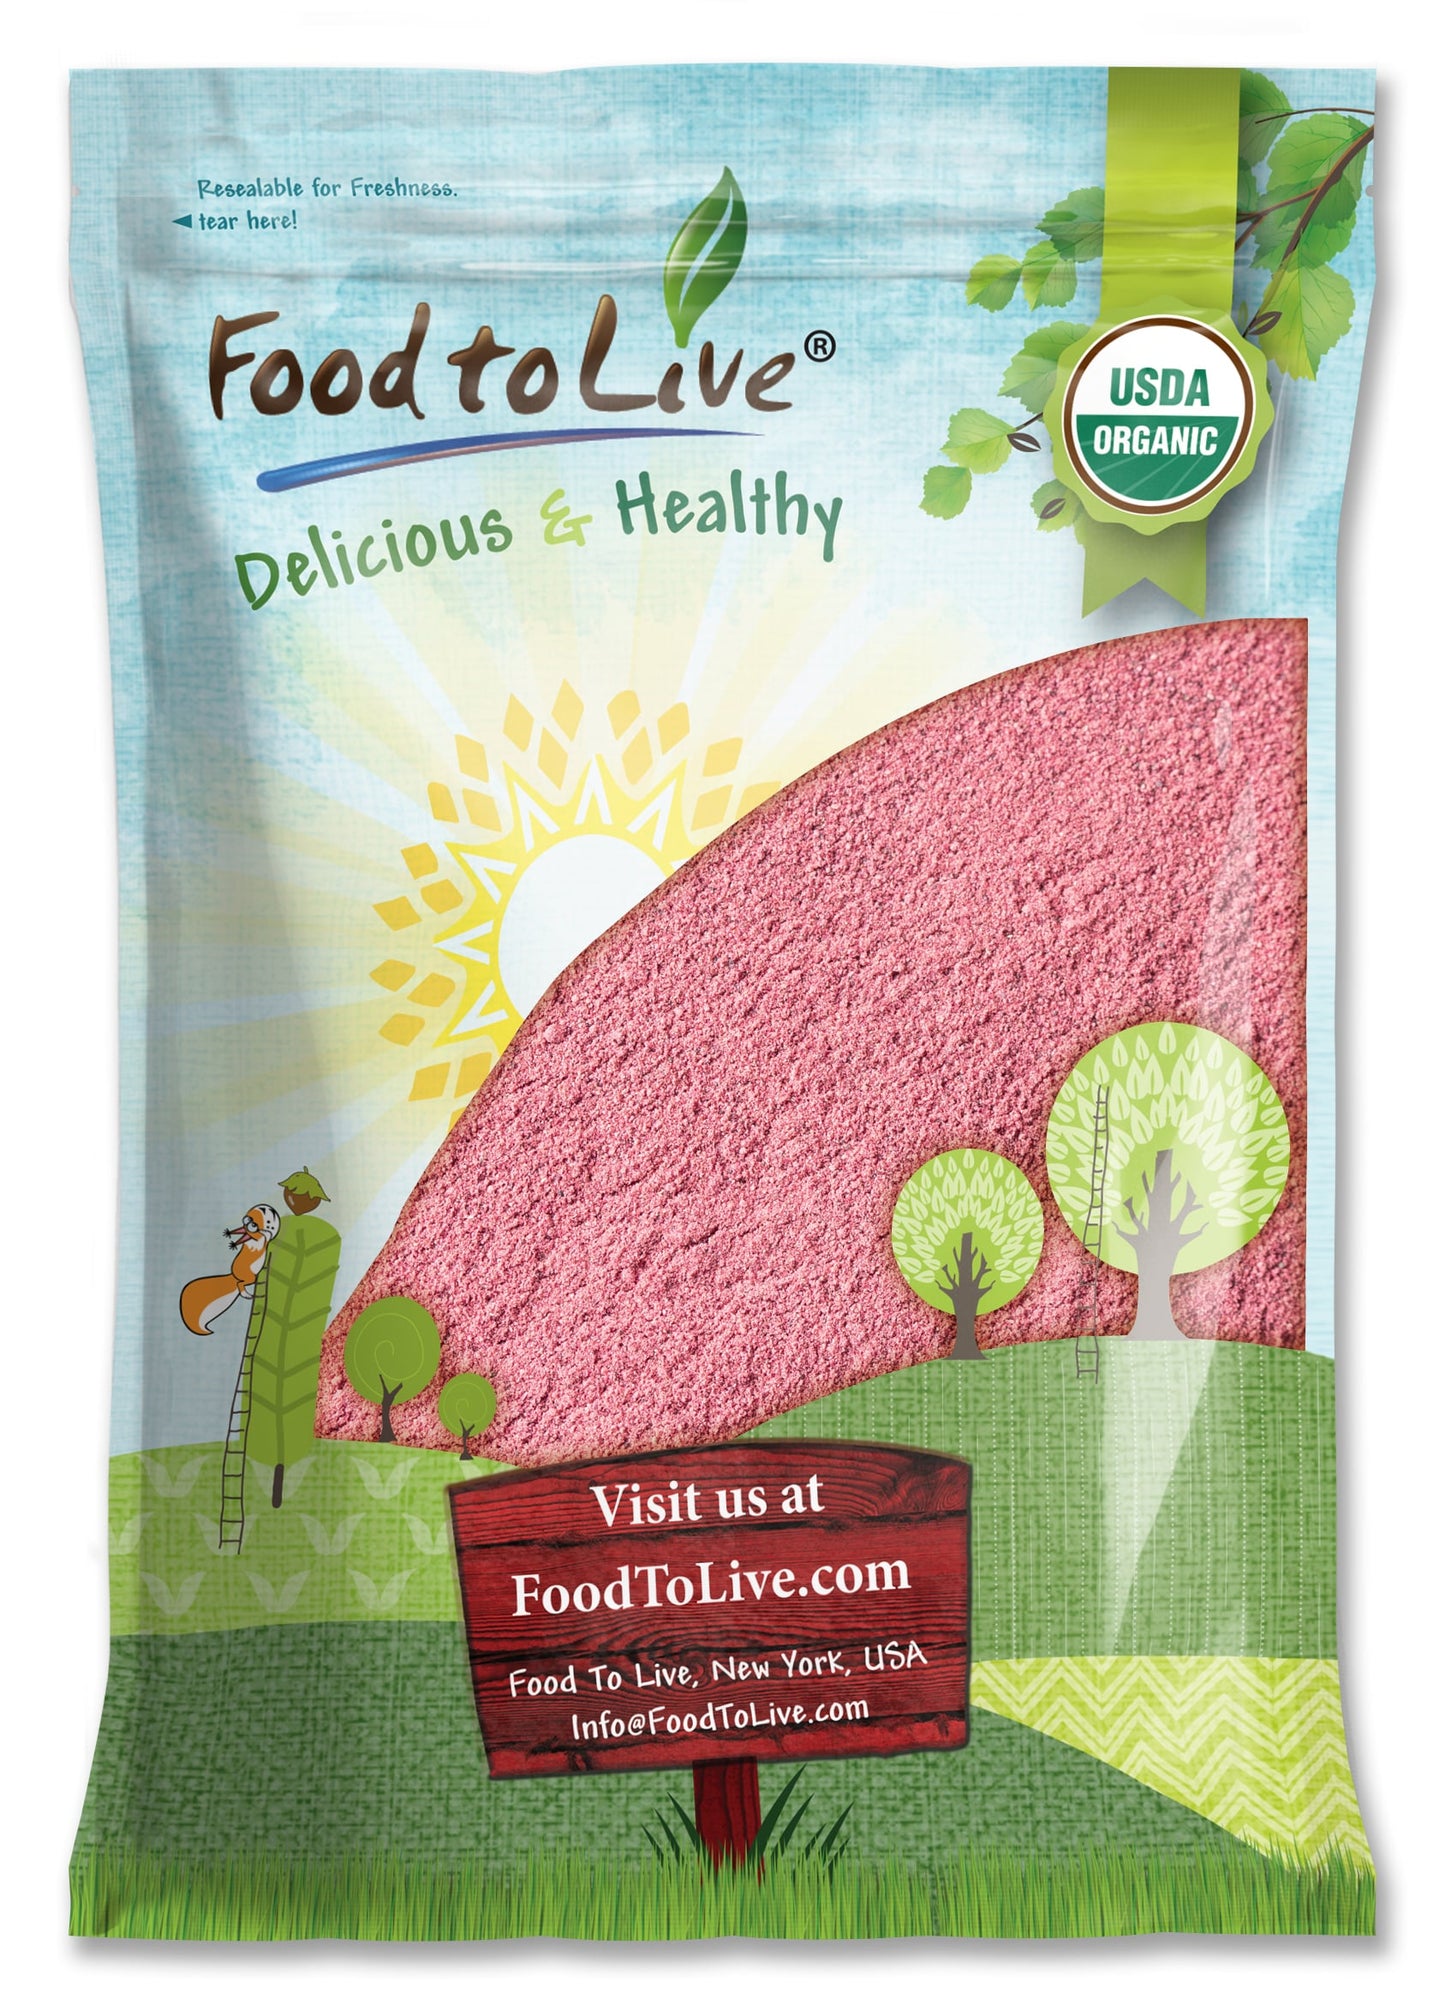 Organic Pomegranate Powder - Non-GMO, Unsulfured, Raw, Dried Fruit, Vegan, Bulk, Great for Juices, Smoothies, Yogurts, and Instant Breakfast Drinks, Contains Maltodextrin, No Sulphites - by Food to Live